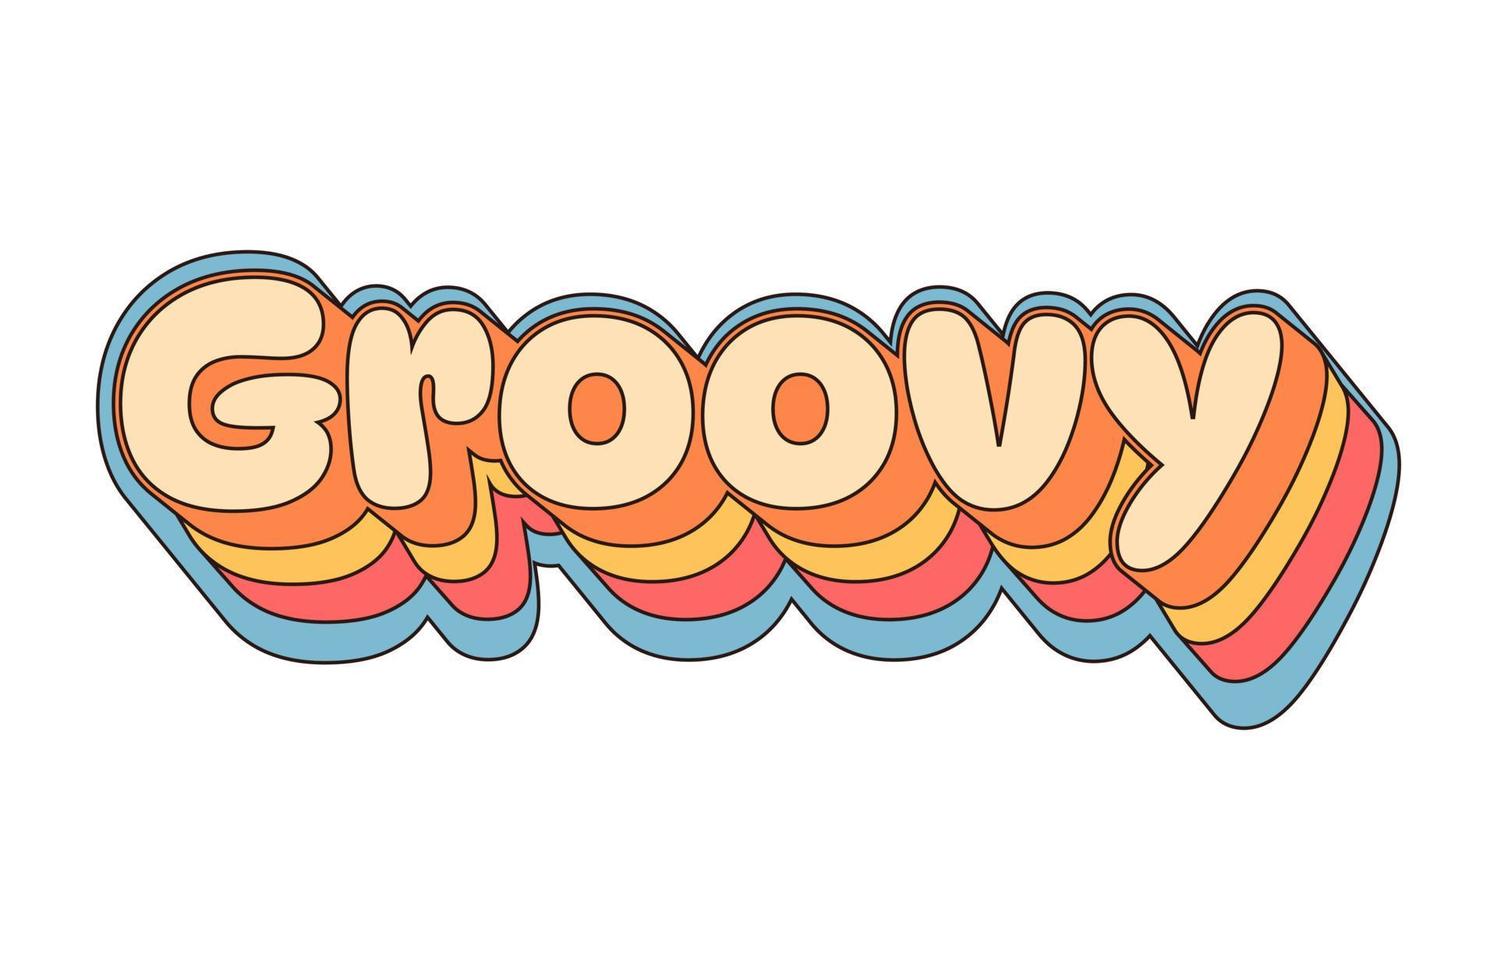 Retro Groovy text. Vintage hippie psychedelic clipart. vector